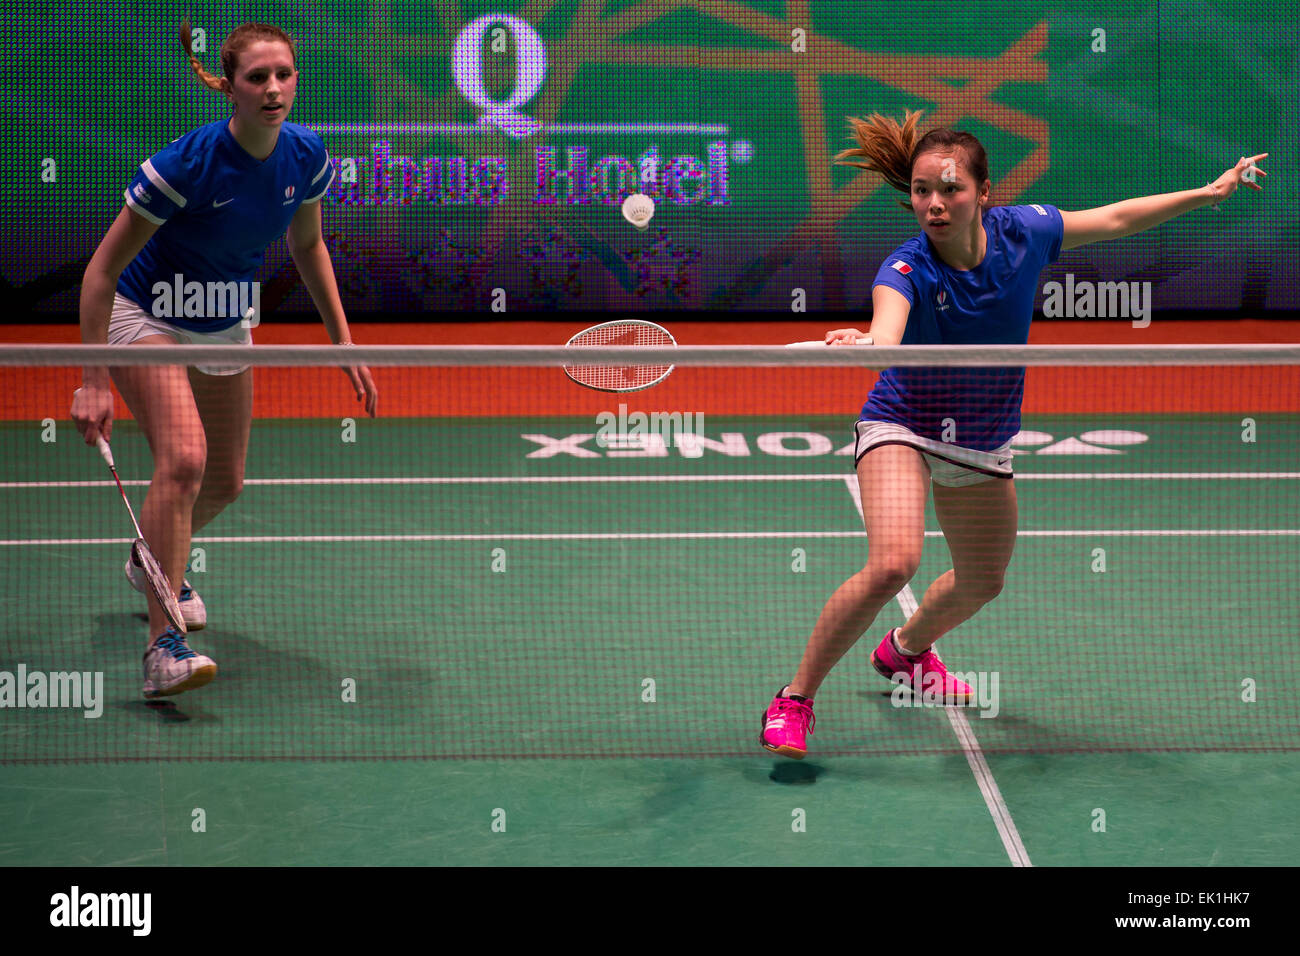 Lubin, Poland. 4th April, 2015. Final of individual tournament in badminton during European Junior Championships 2015. Women's doubles match between Danmark (red): Julie Dawall Jakobsen and Ditte Soby Hansen - France (blue): Verlaine Faulmann (L) and Anne Tran (R) Credit:  Piotr Dziurman/Alamy Live News Stock Photo